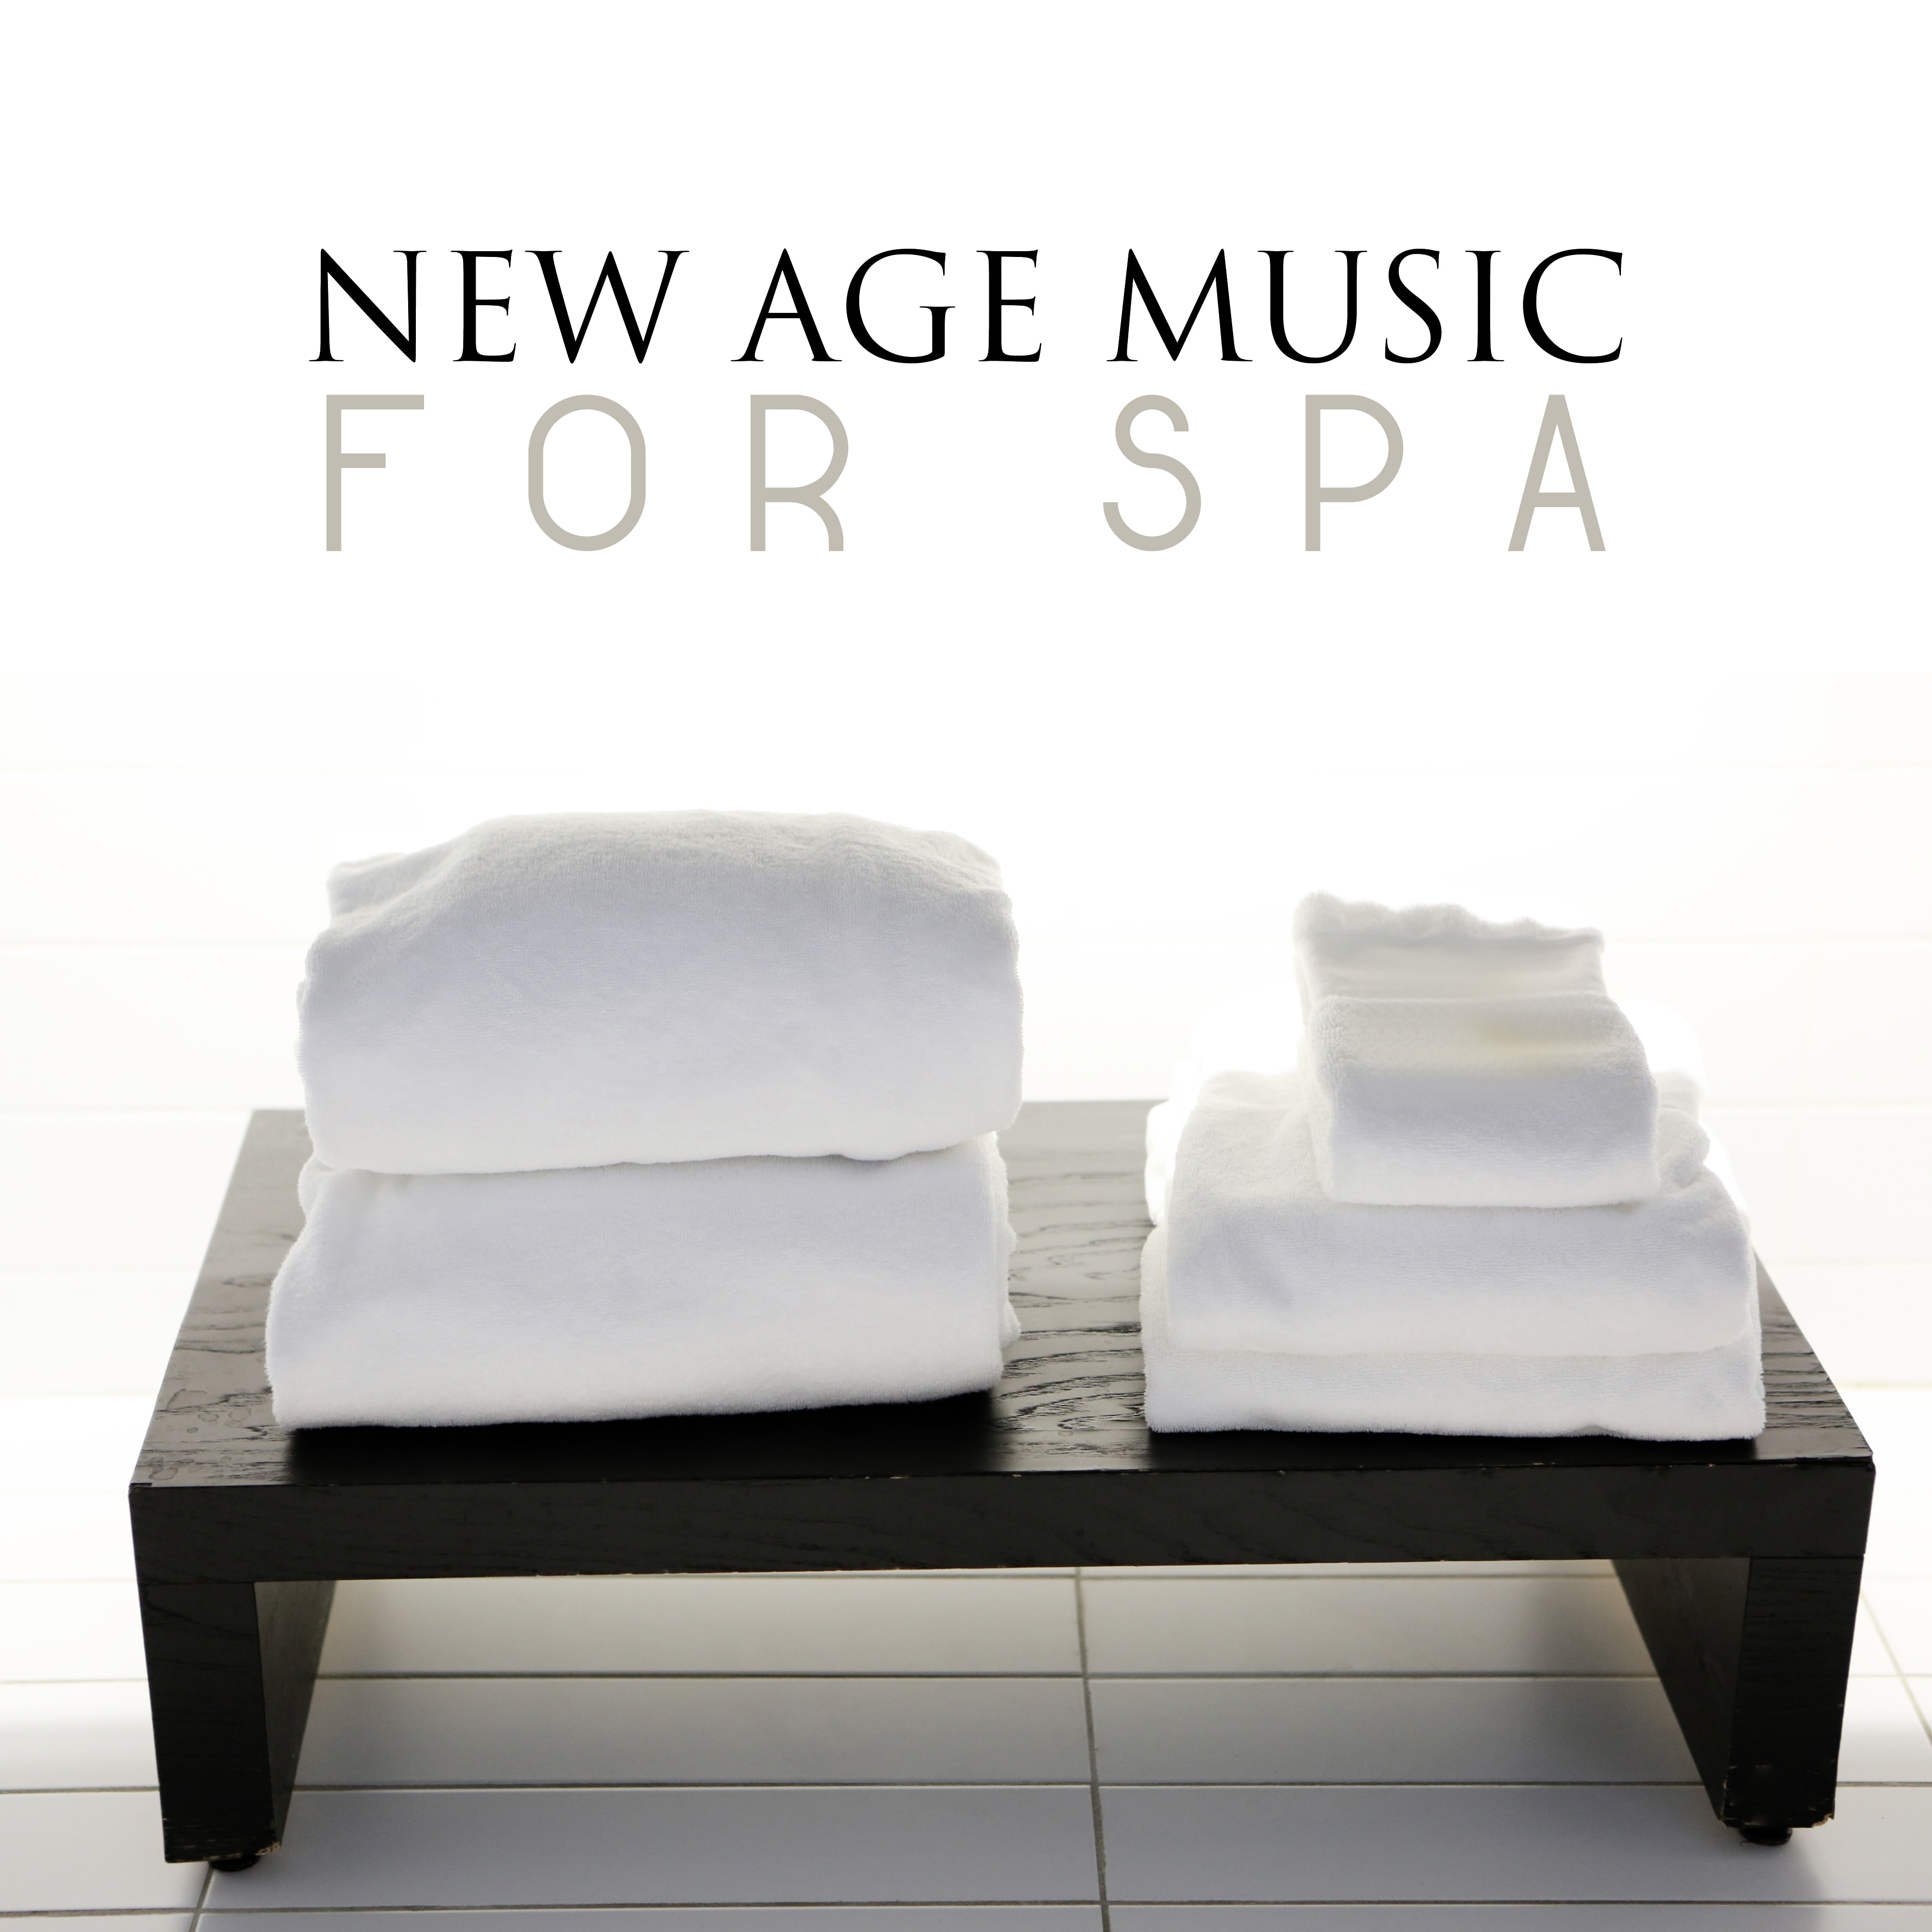 New Age Music for Spa  Massage Dream, Deep Relief, Anti Stress Sounds, Healing Nature, Zen, Tranquility, Spa Music